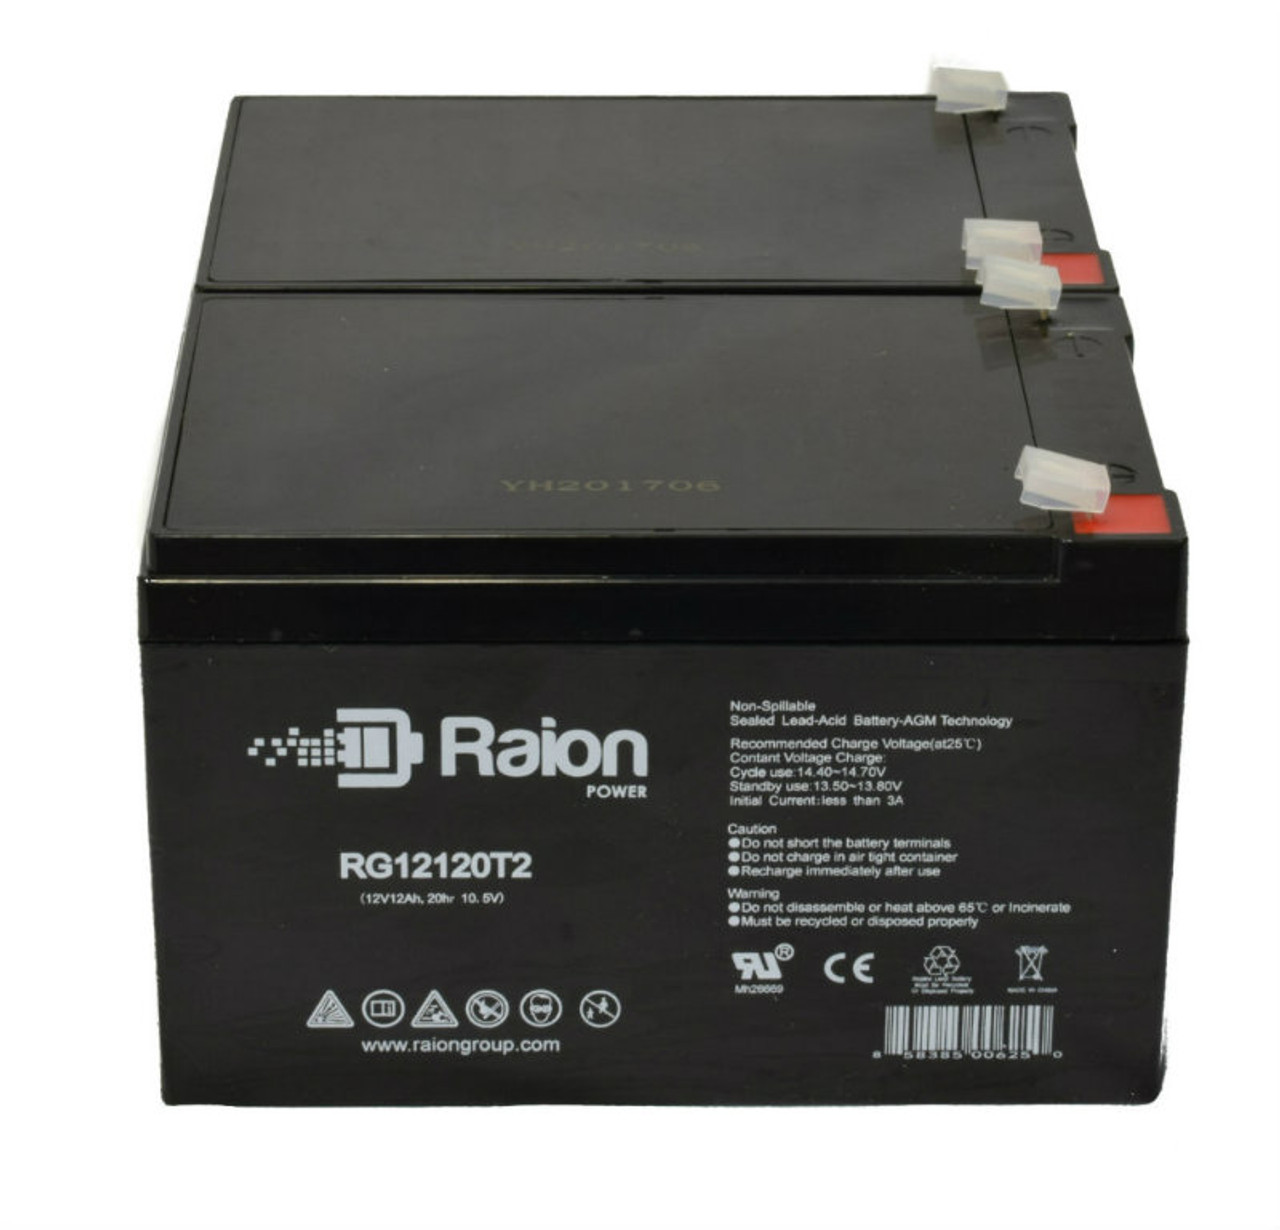 Raion Power 12V 12Ah Non-Spillable Compatible Replacement Battery for Sealake FM12100 - (2 Pack)